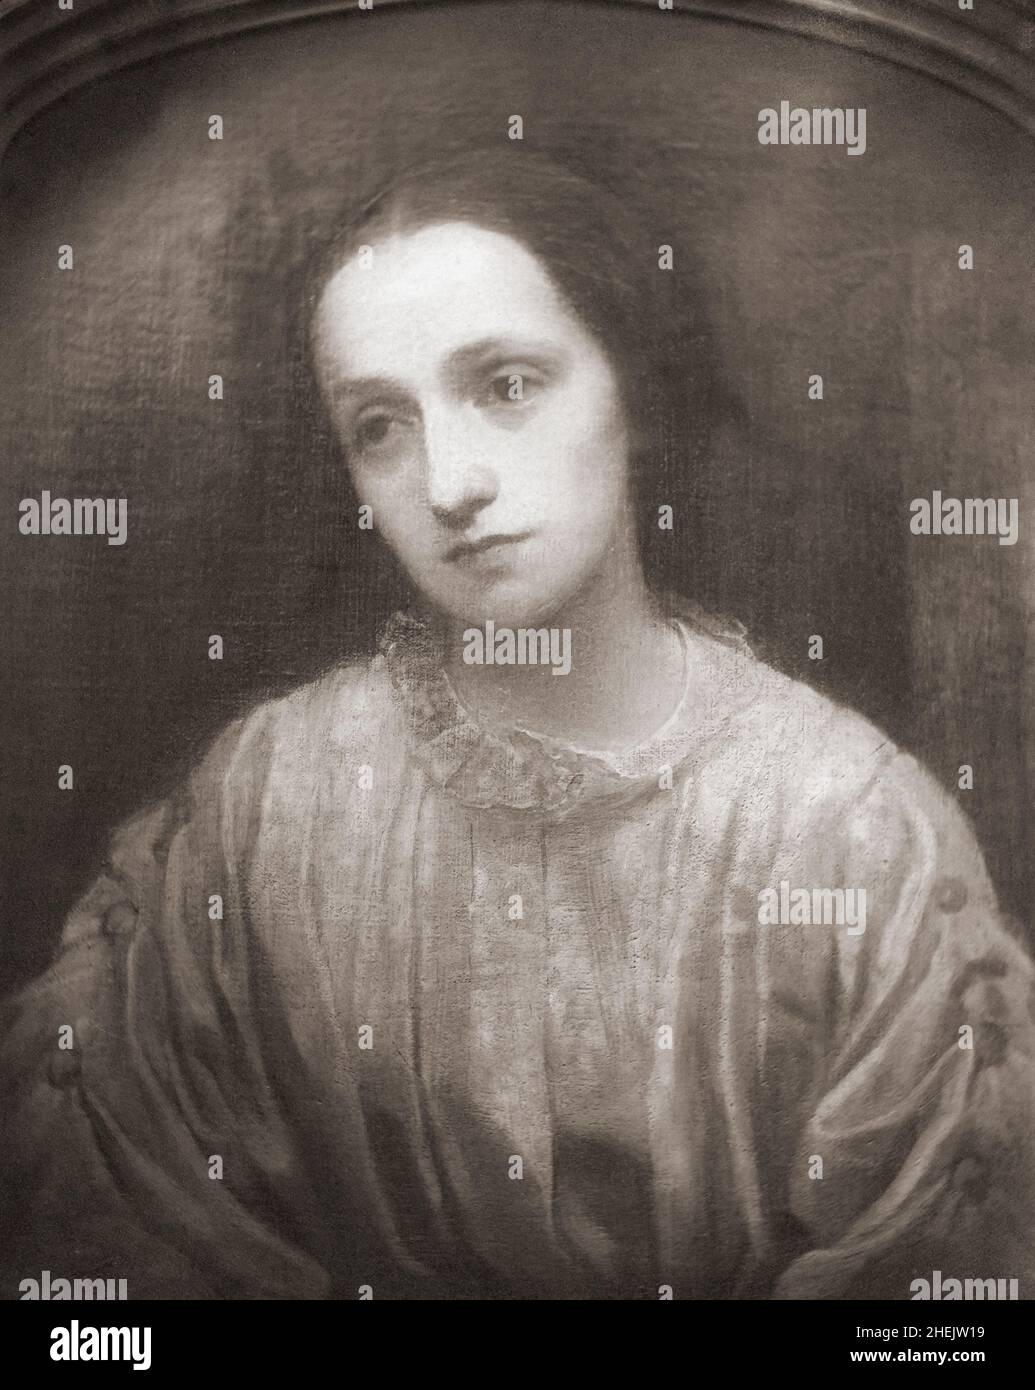 British photographer Julia Margaret Cameron, 1815 - 1879.  After a black and white photograph of a painting created circa 1850 by British artist George Frederic Watts. Stock Photo